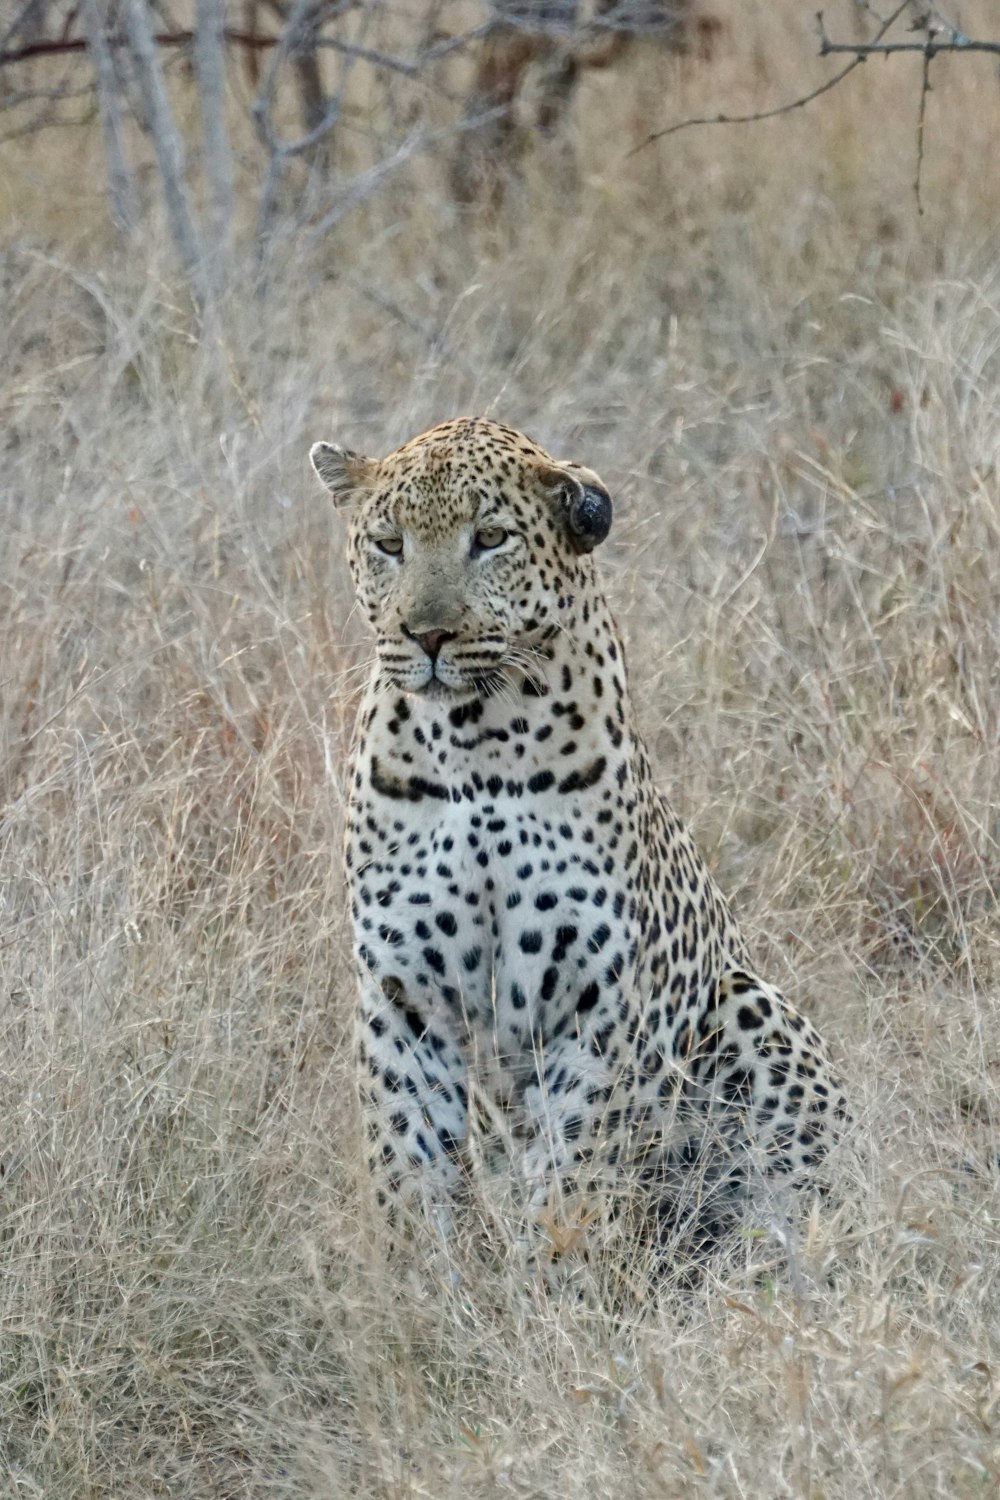 a leopard sitting in a field of dry grass